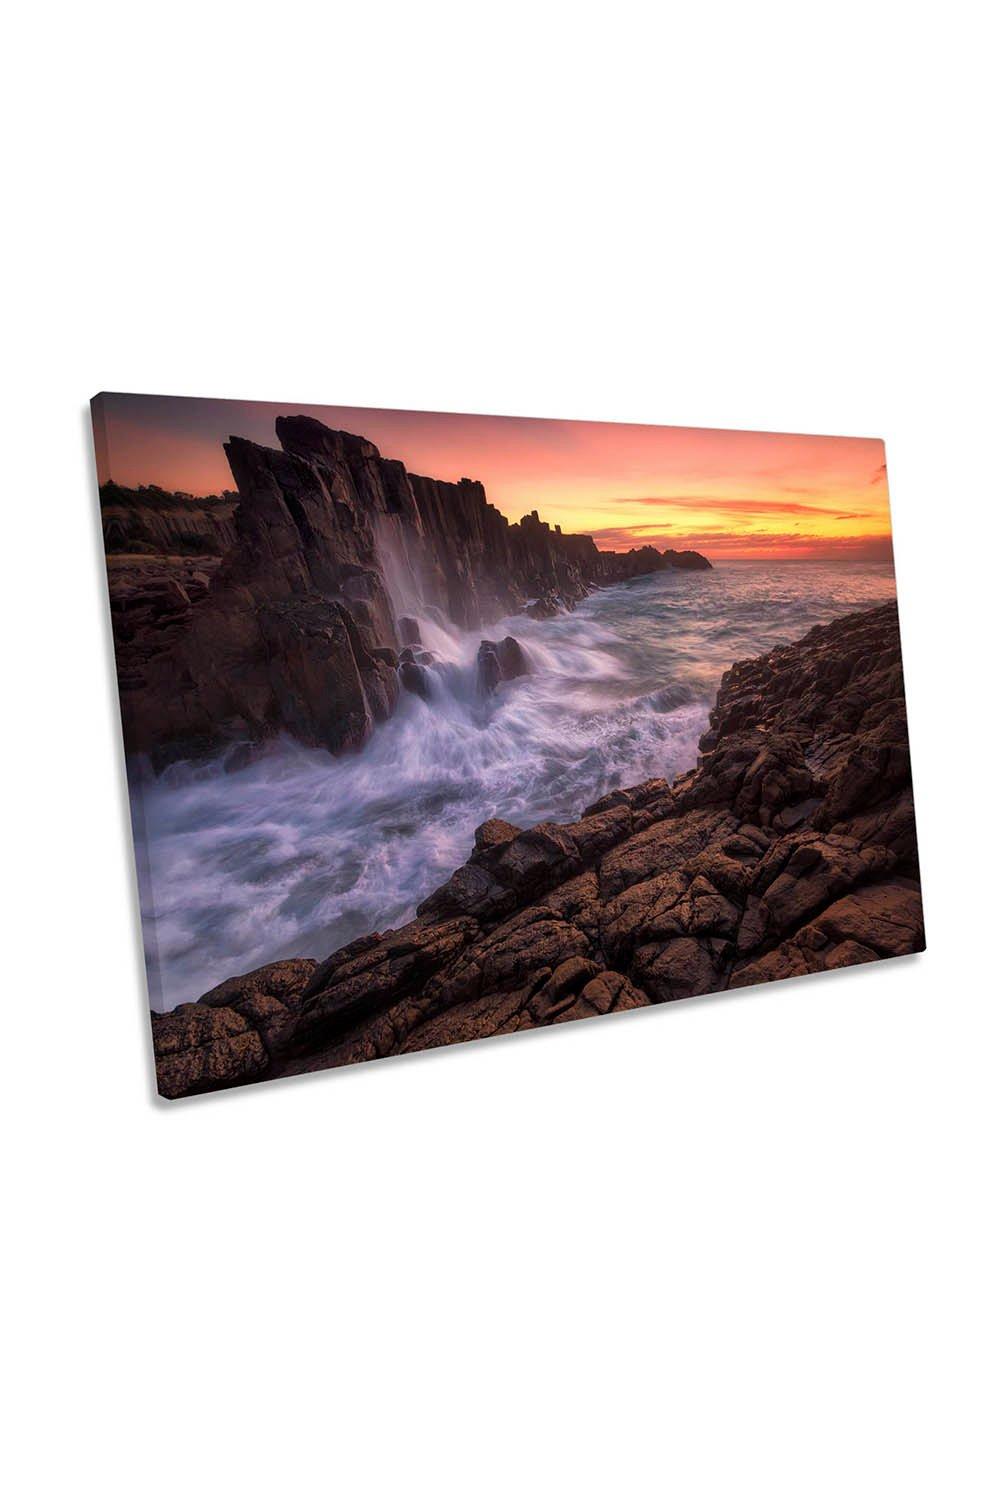 Wall by the Sea Sunset Seascape Canvas Wall Art Picture Print